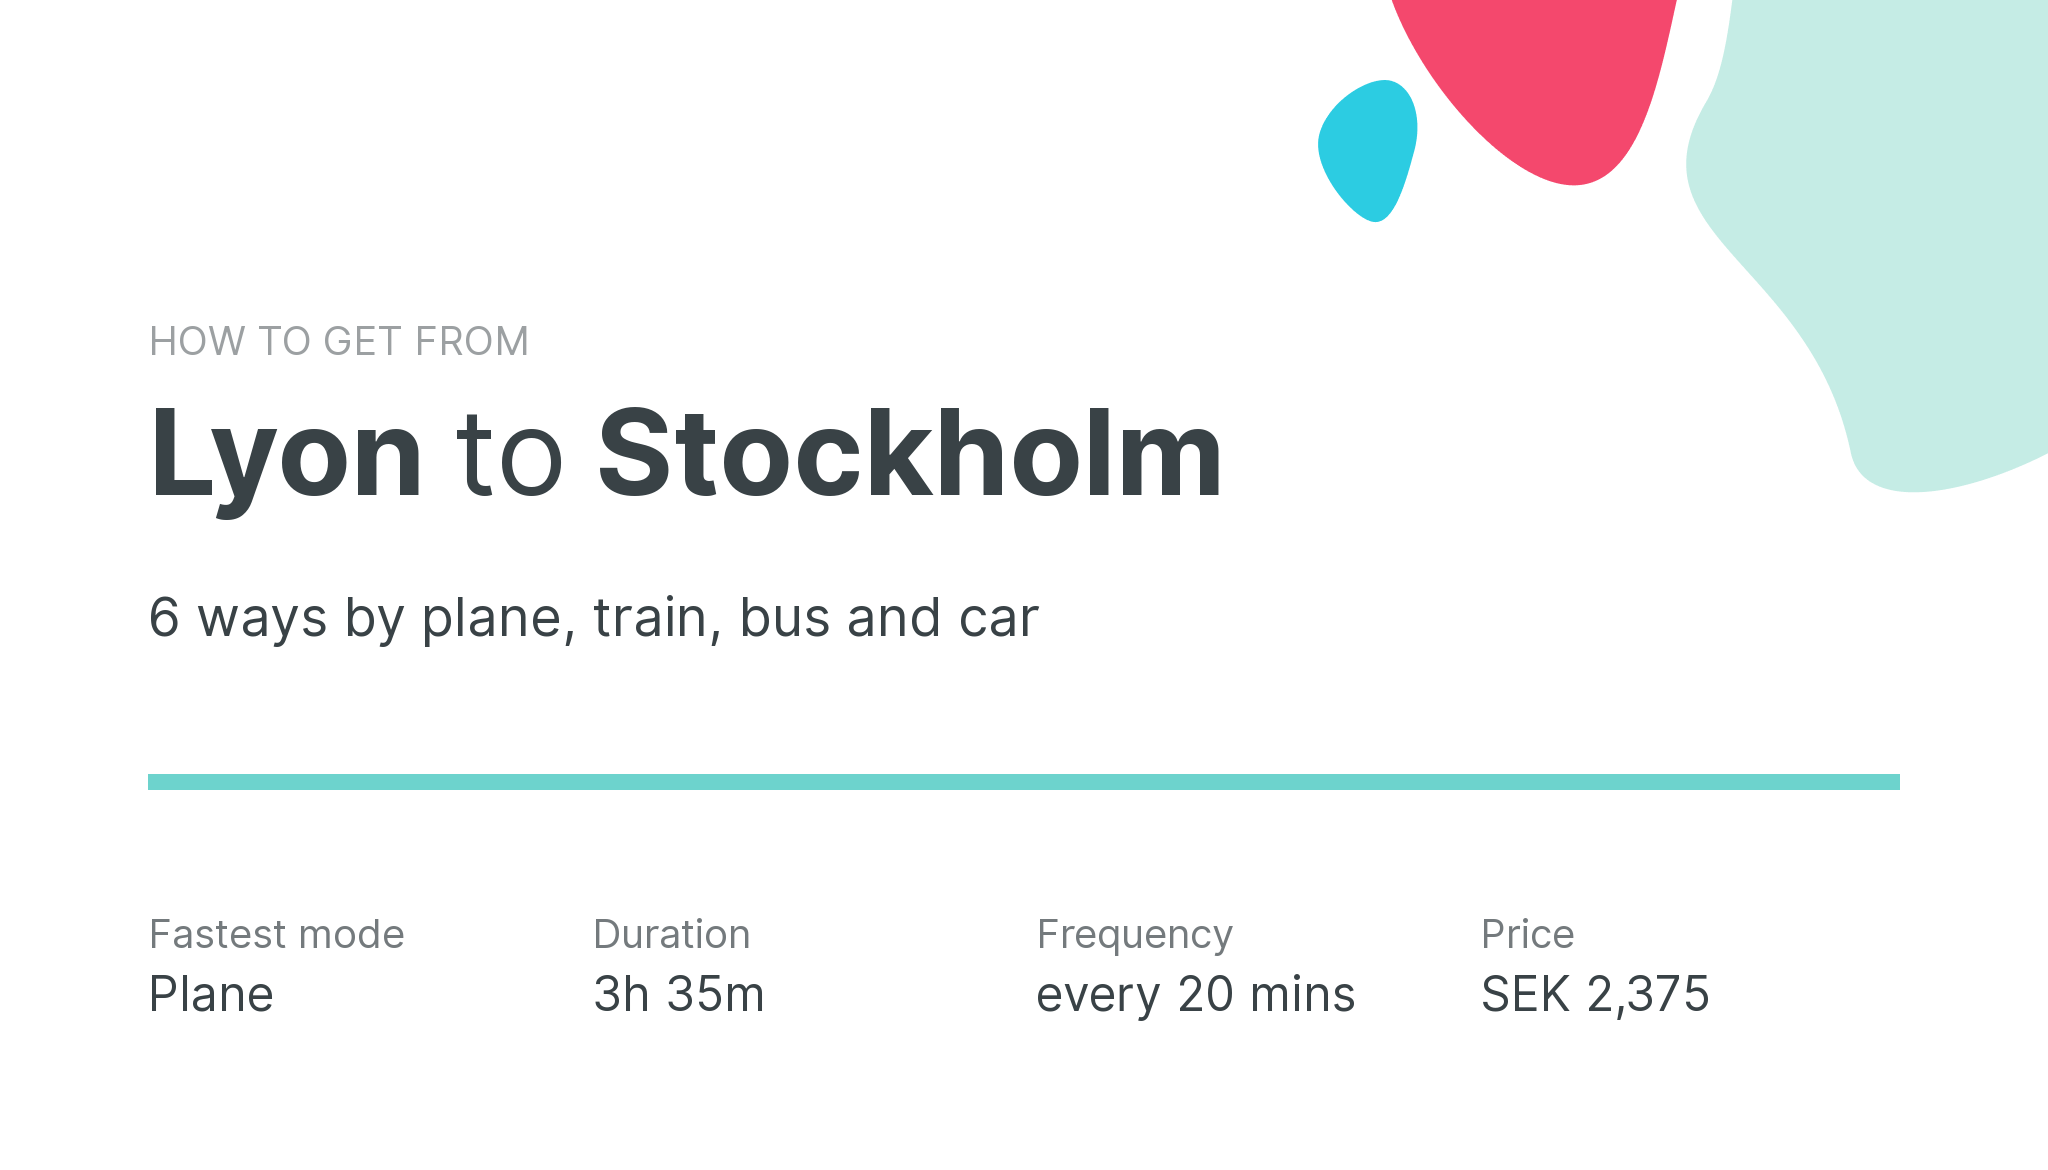 How do I get from Lyon to Stockholm